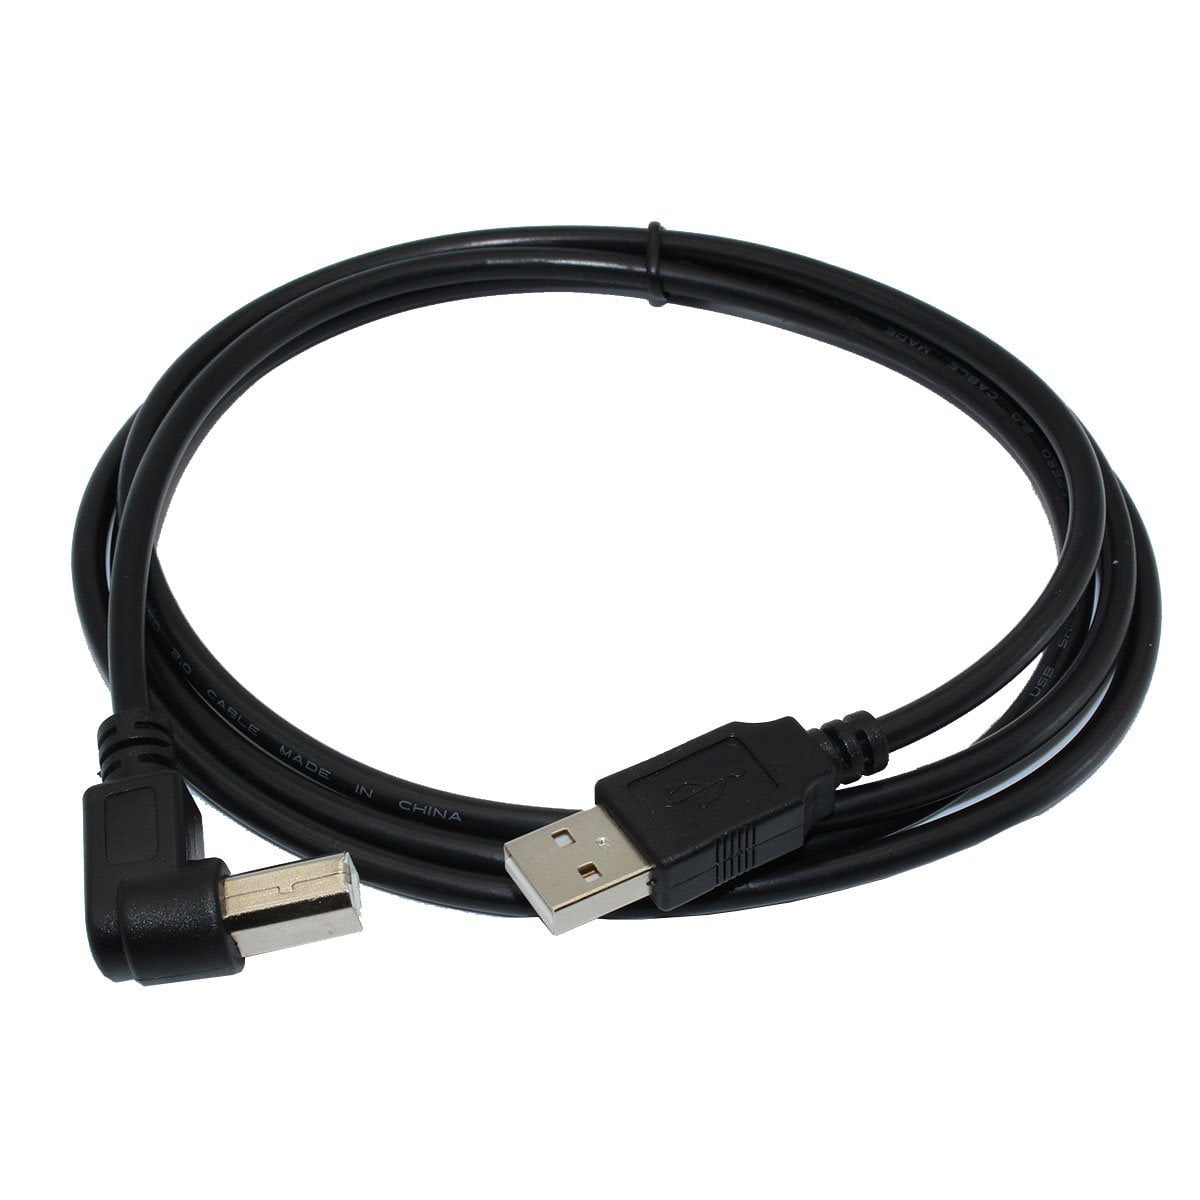 15ft USB 2.0 Extension & 10ft A Male/B Male Cable for HP Officejet 4630 e-All-in-One Printer B4L03A#B1H Printer